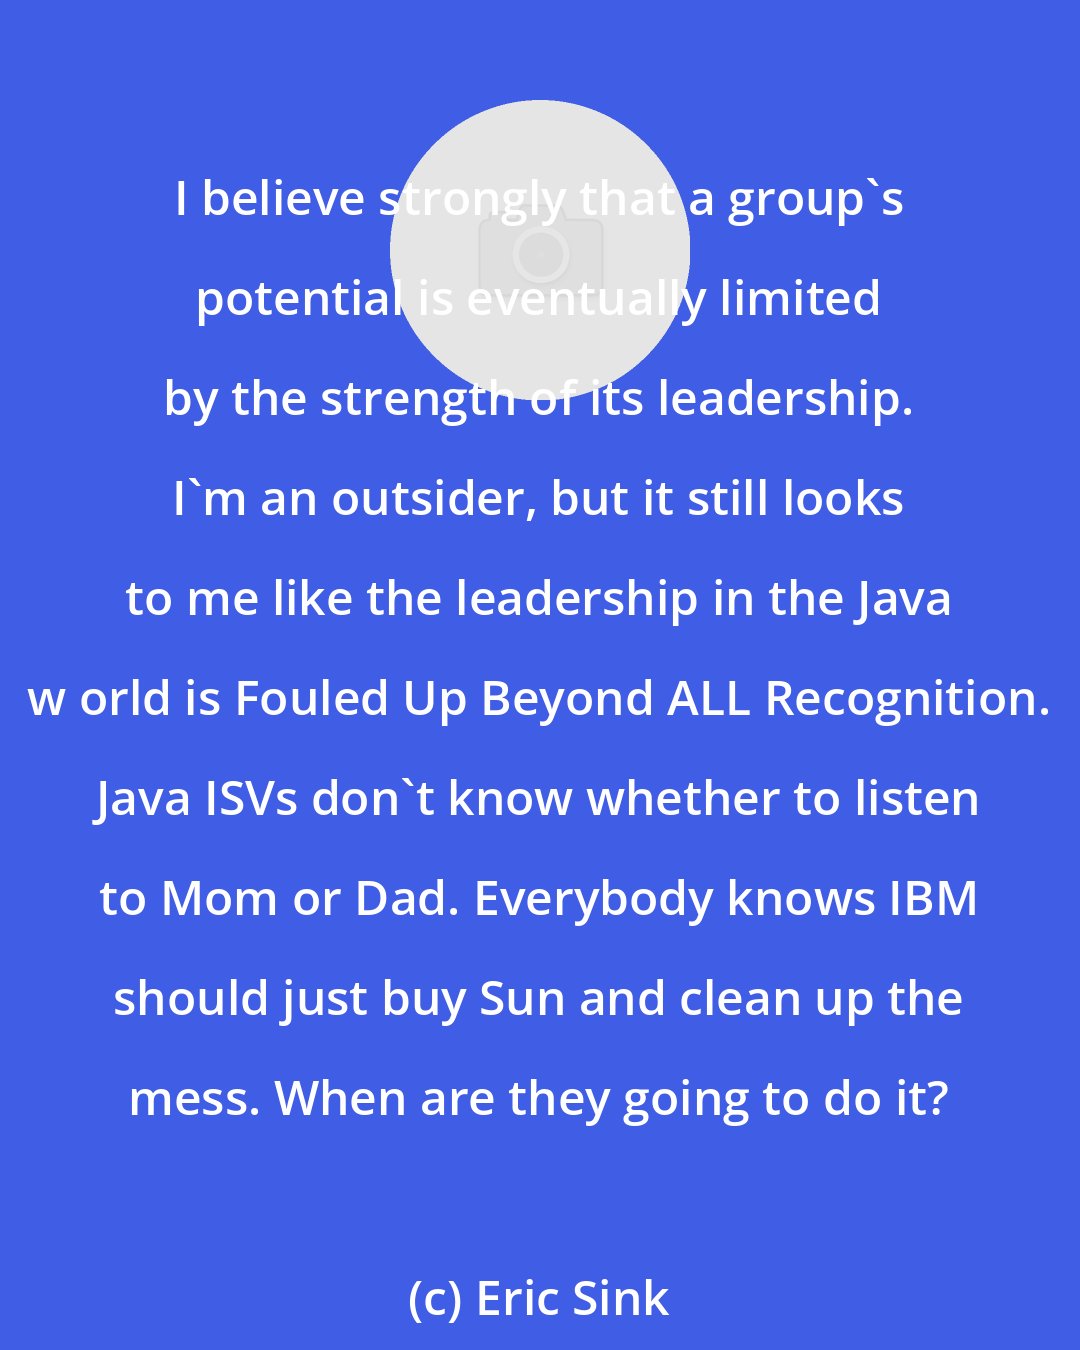 Eric Sink: I believe strongly that a group's potential is eventually limited by the strength of its leadership. I'm an outsider, but it still looks to me like the leadership in the Java w orld is Fouled Up Beyond ALL Recognition. Java ISVs don't know whether to listen to Mom or Dad. Everybody knows IBM should just buy Sun and clean up the mess. When are they going to do it?